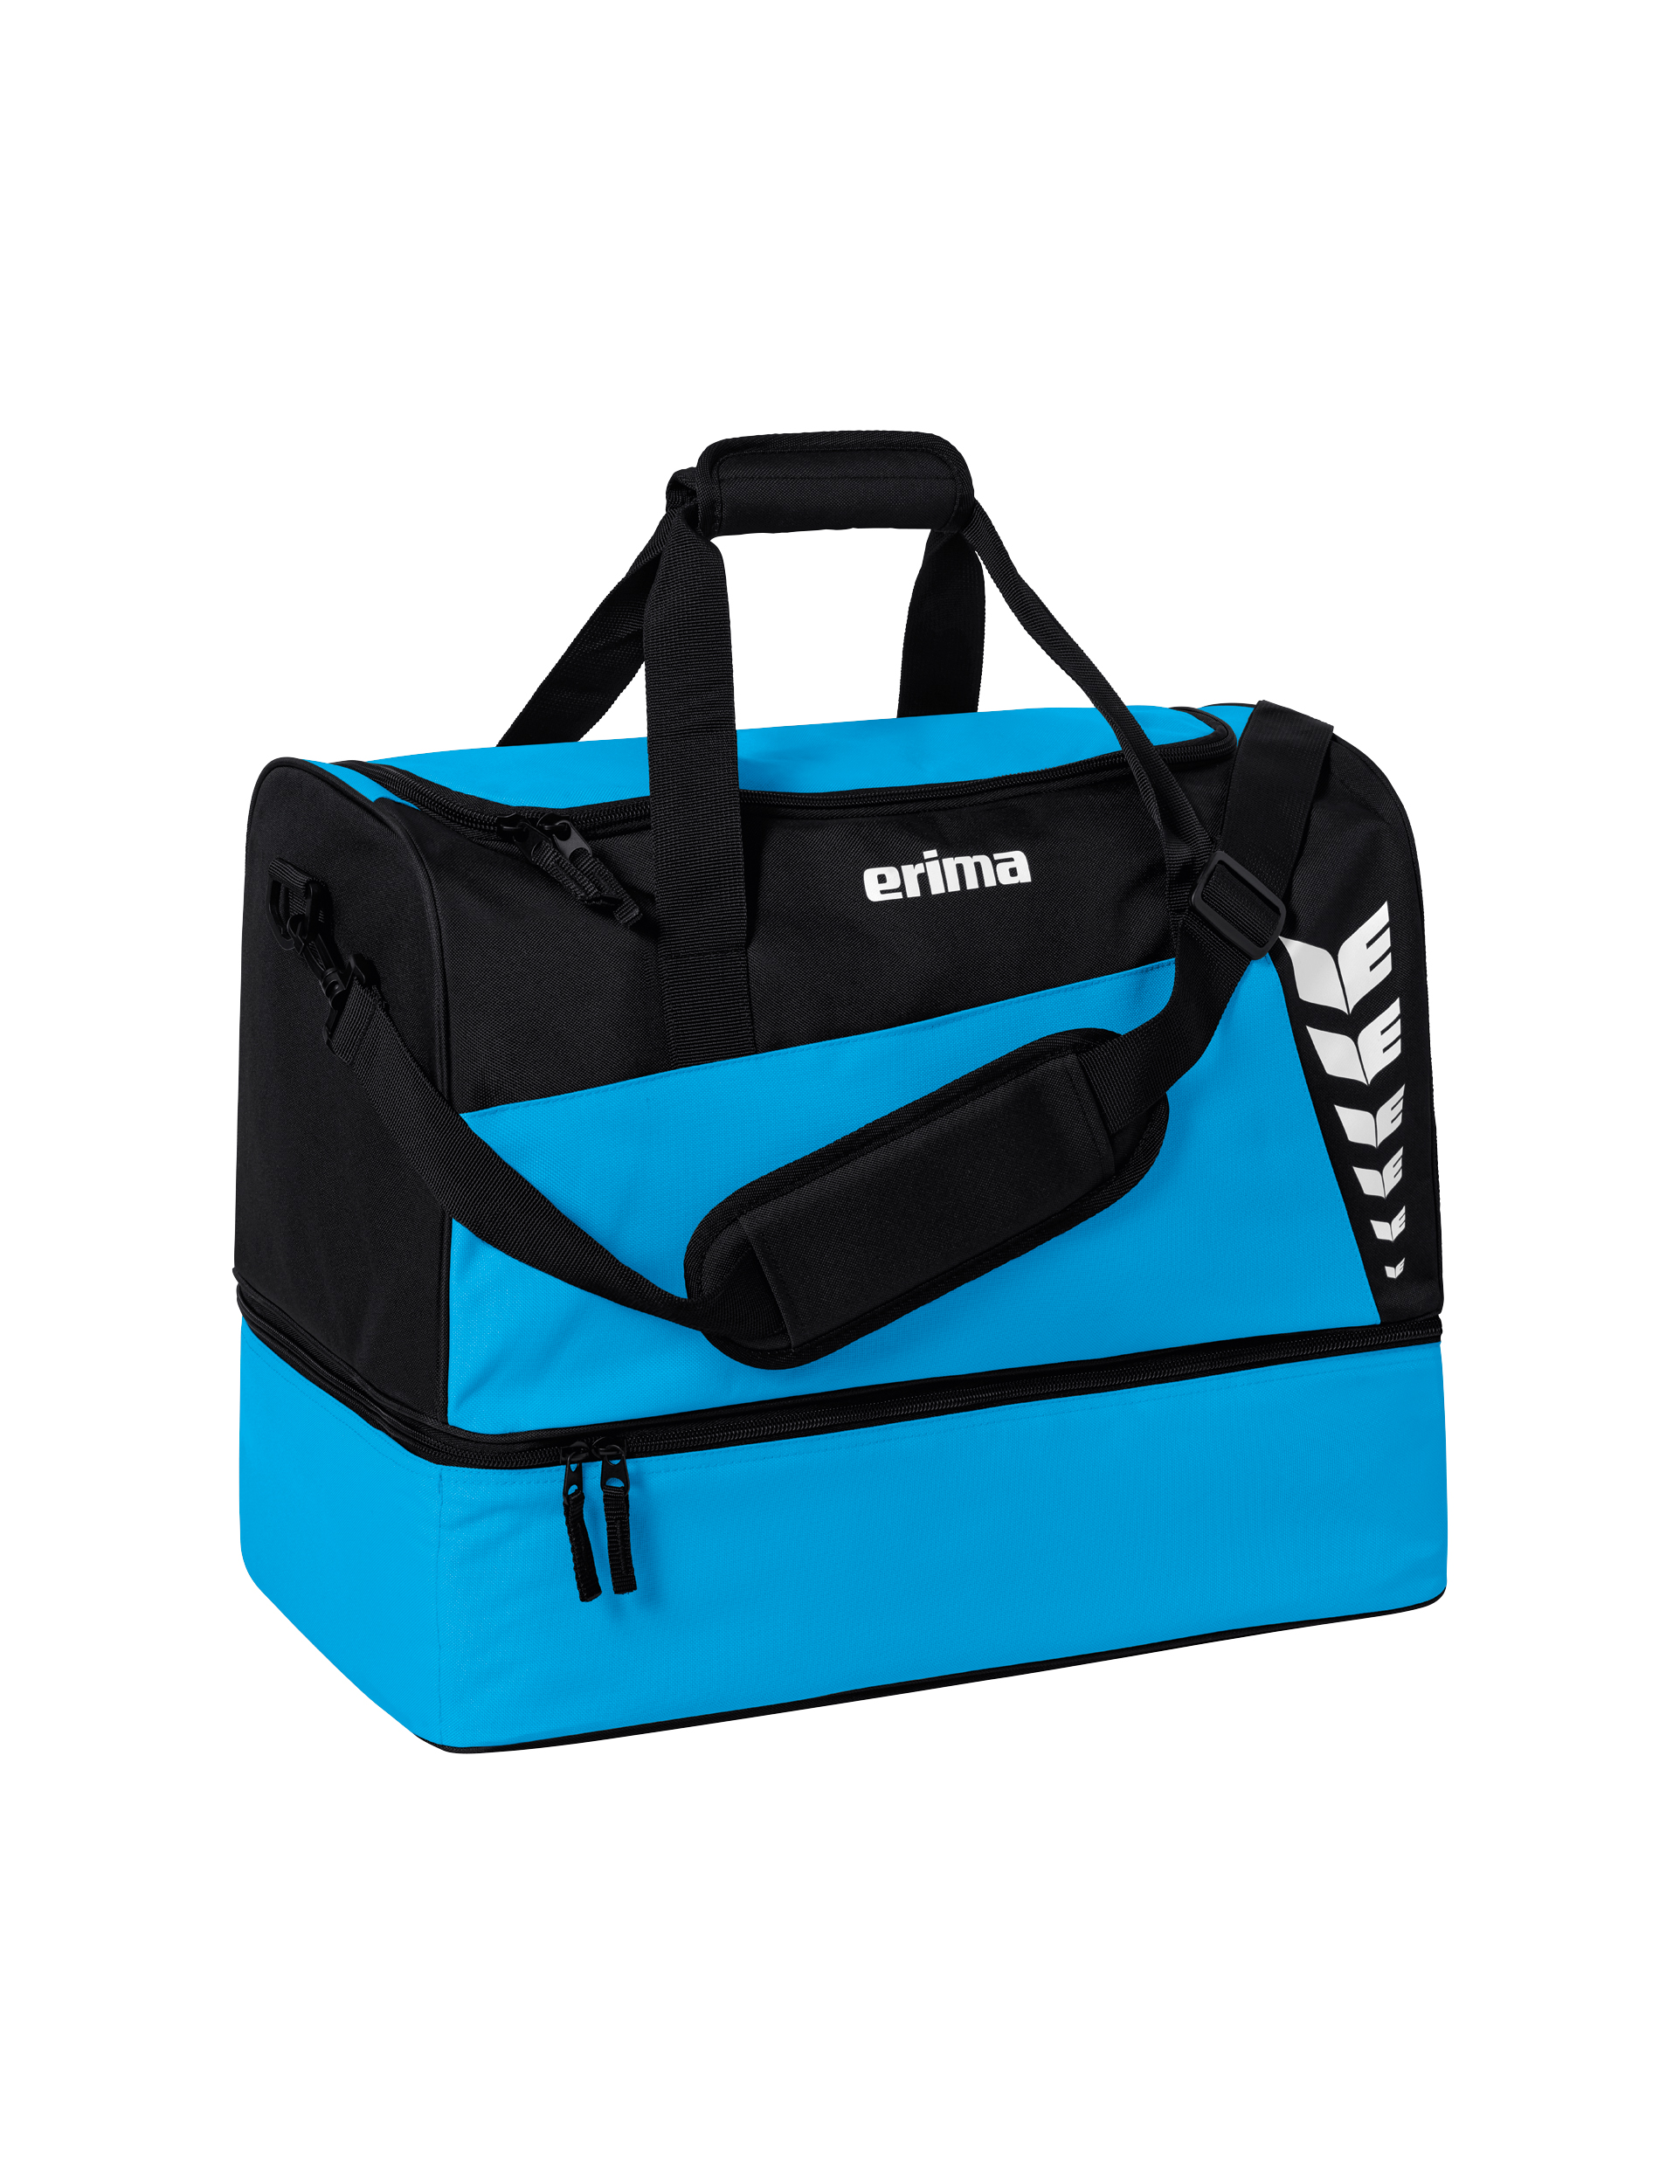 SIX WINGS sportsbag with bottom cas